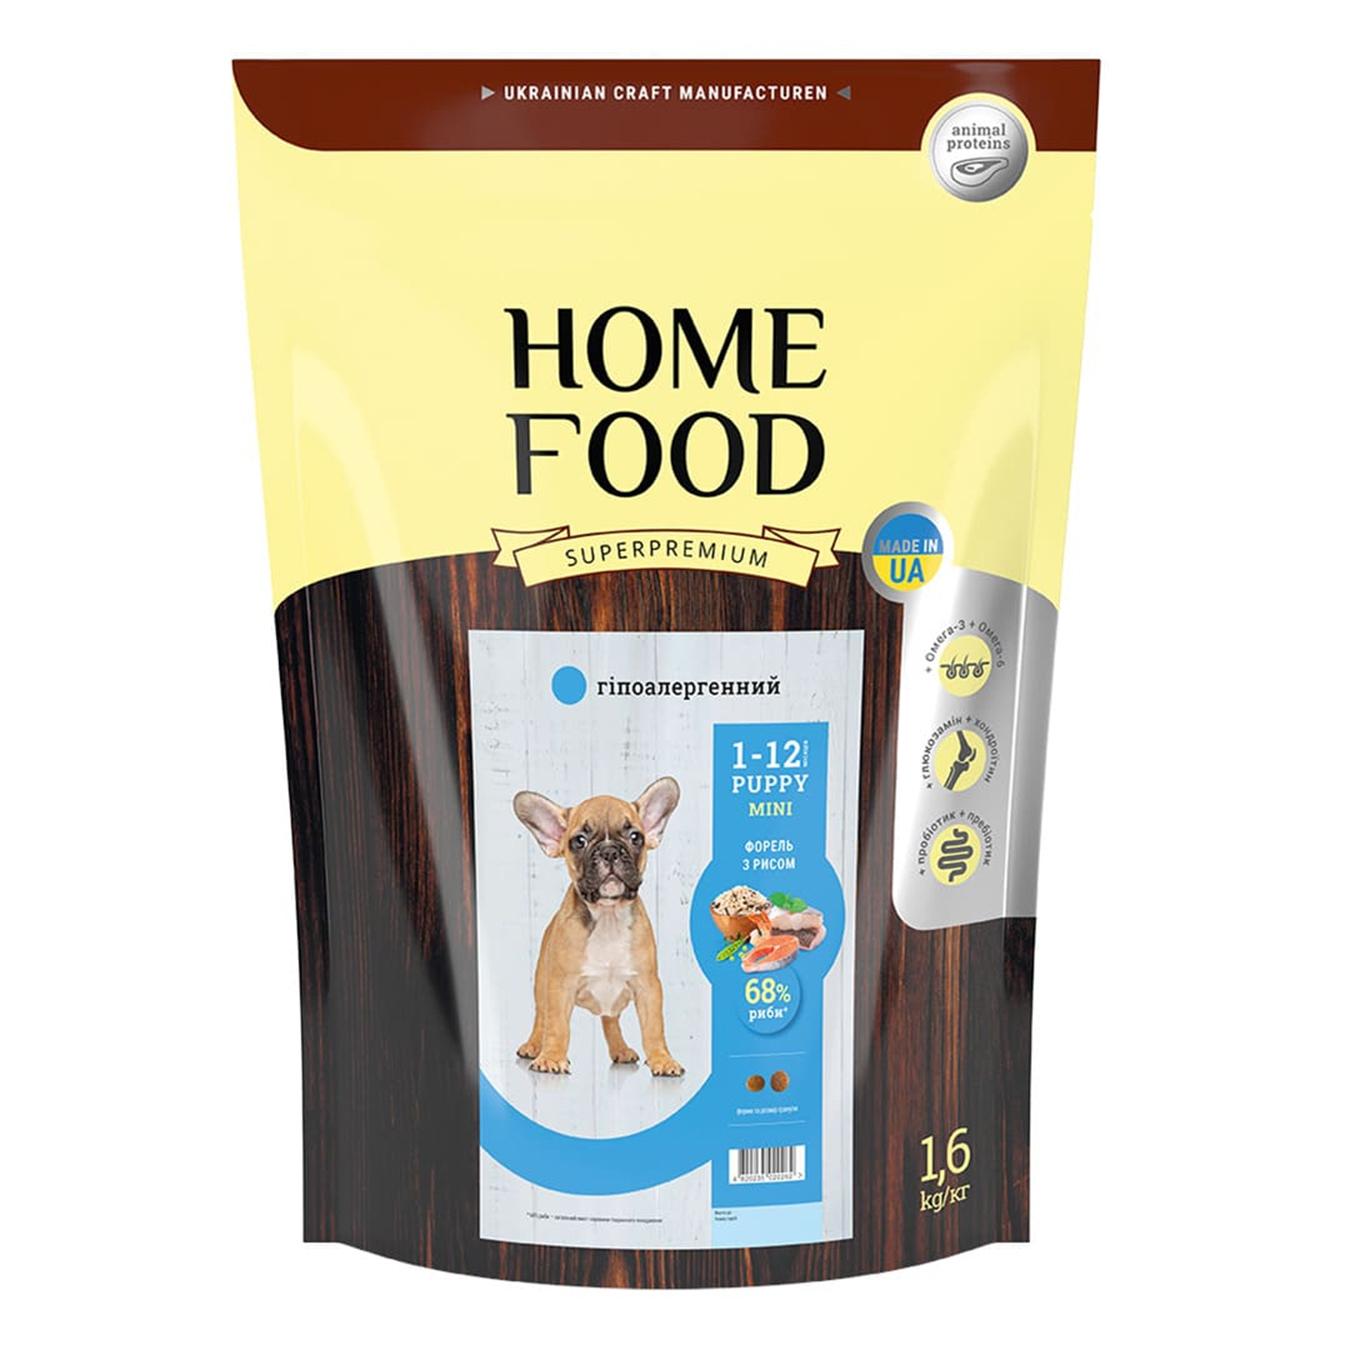 Home Food for puppies mini hypoallergenic dry trout with rice 1.6 kg